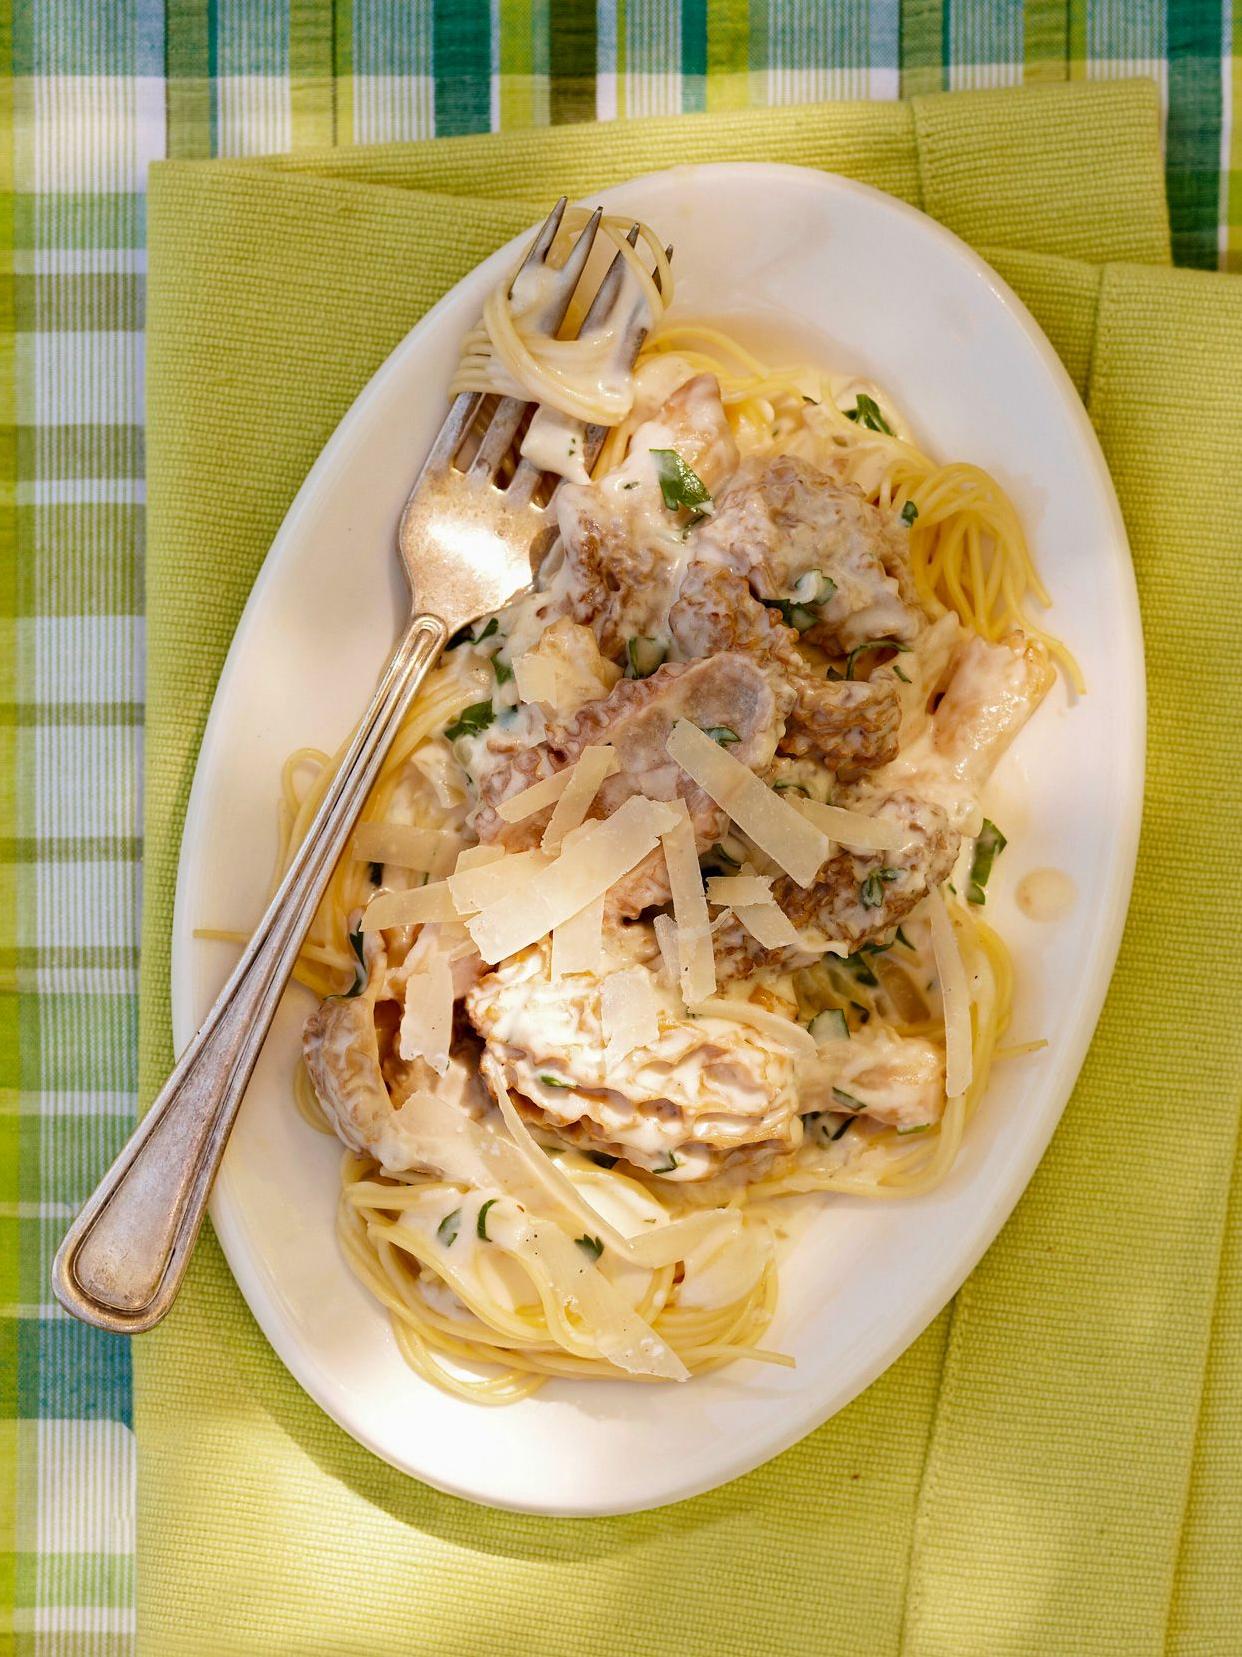  Impress your guests with a homemade cream sauce that is both healthy and delicious!